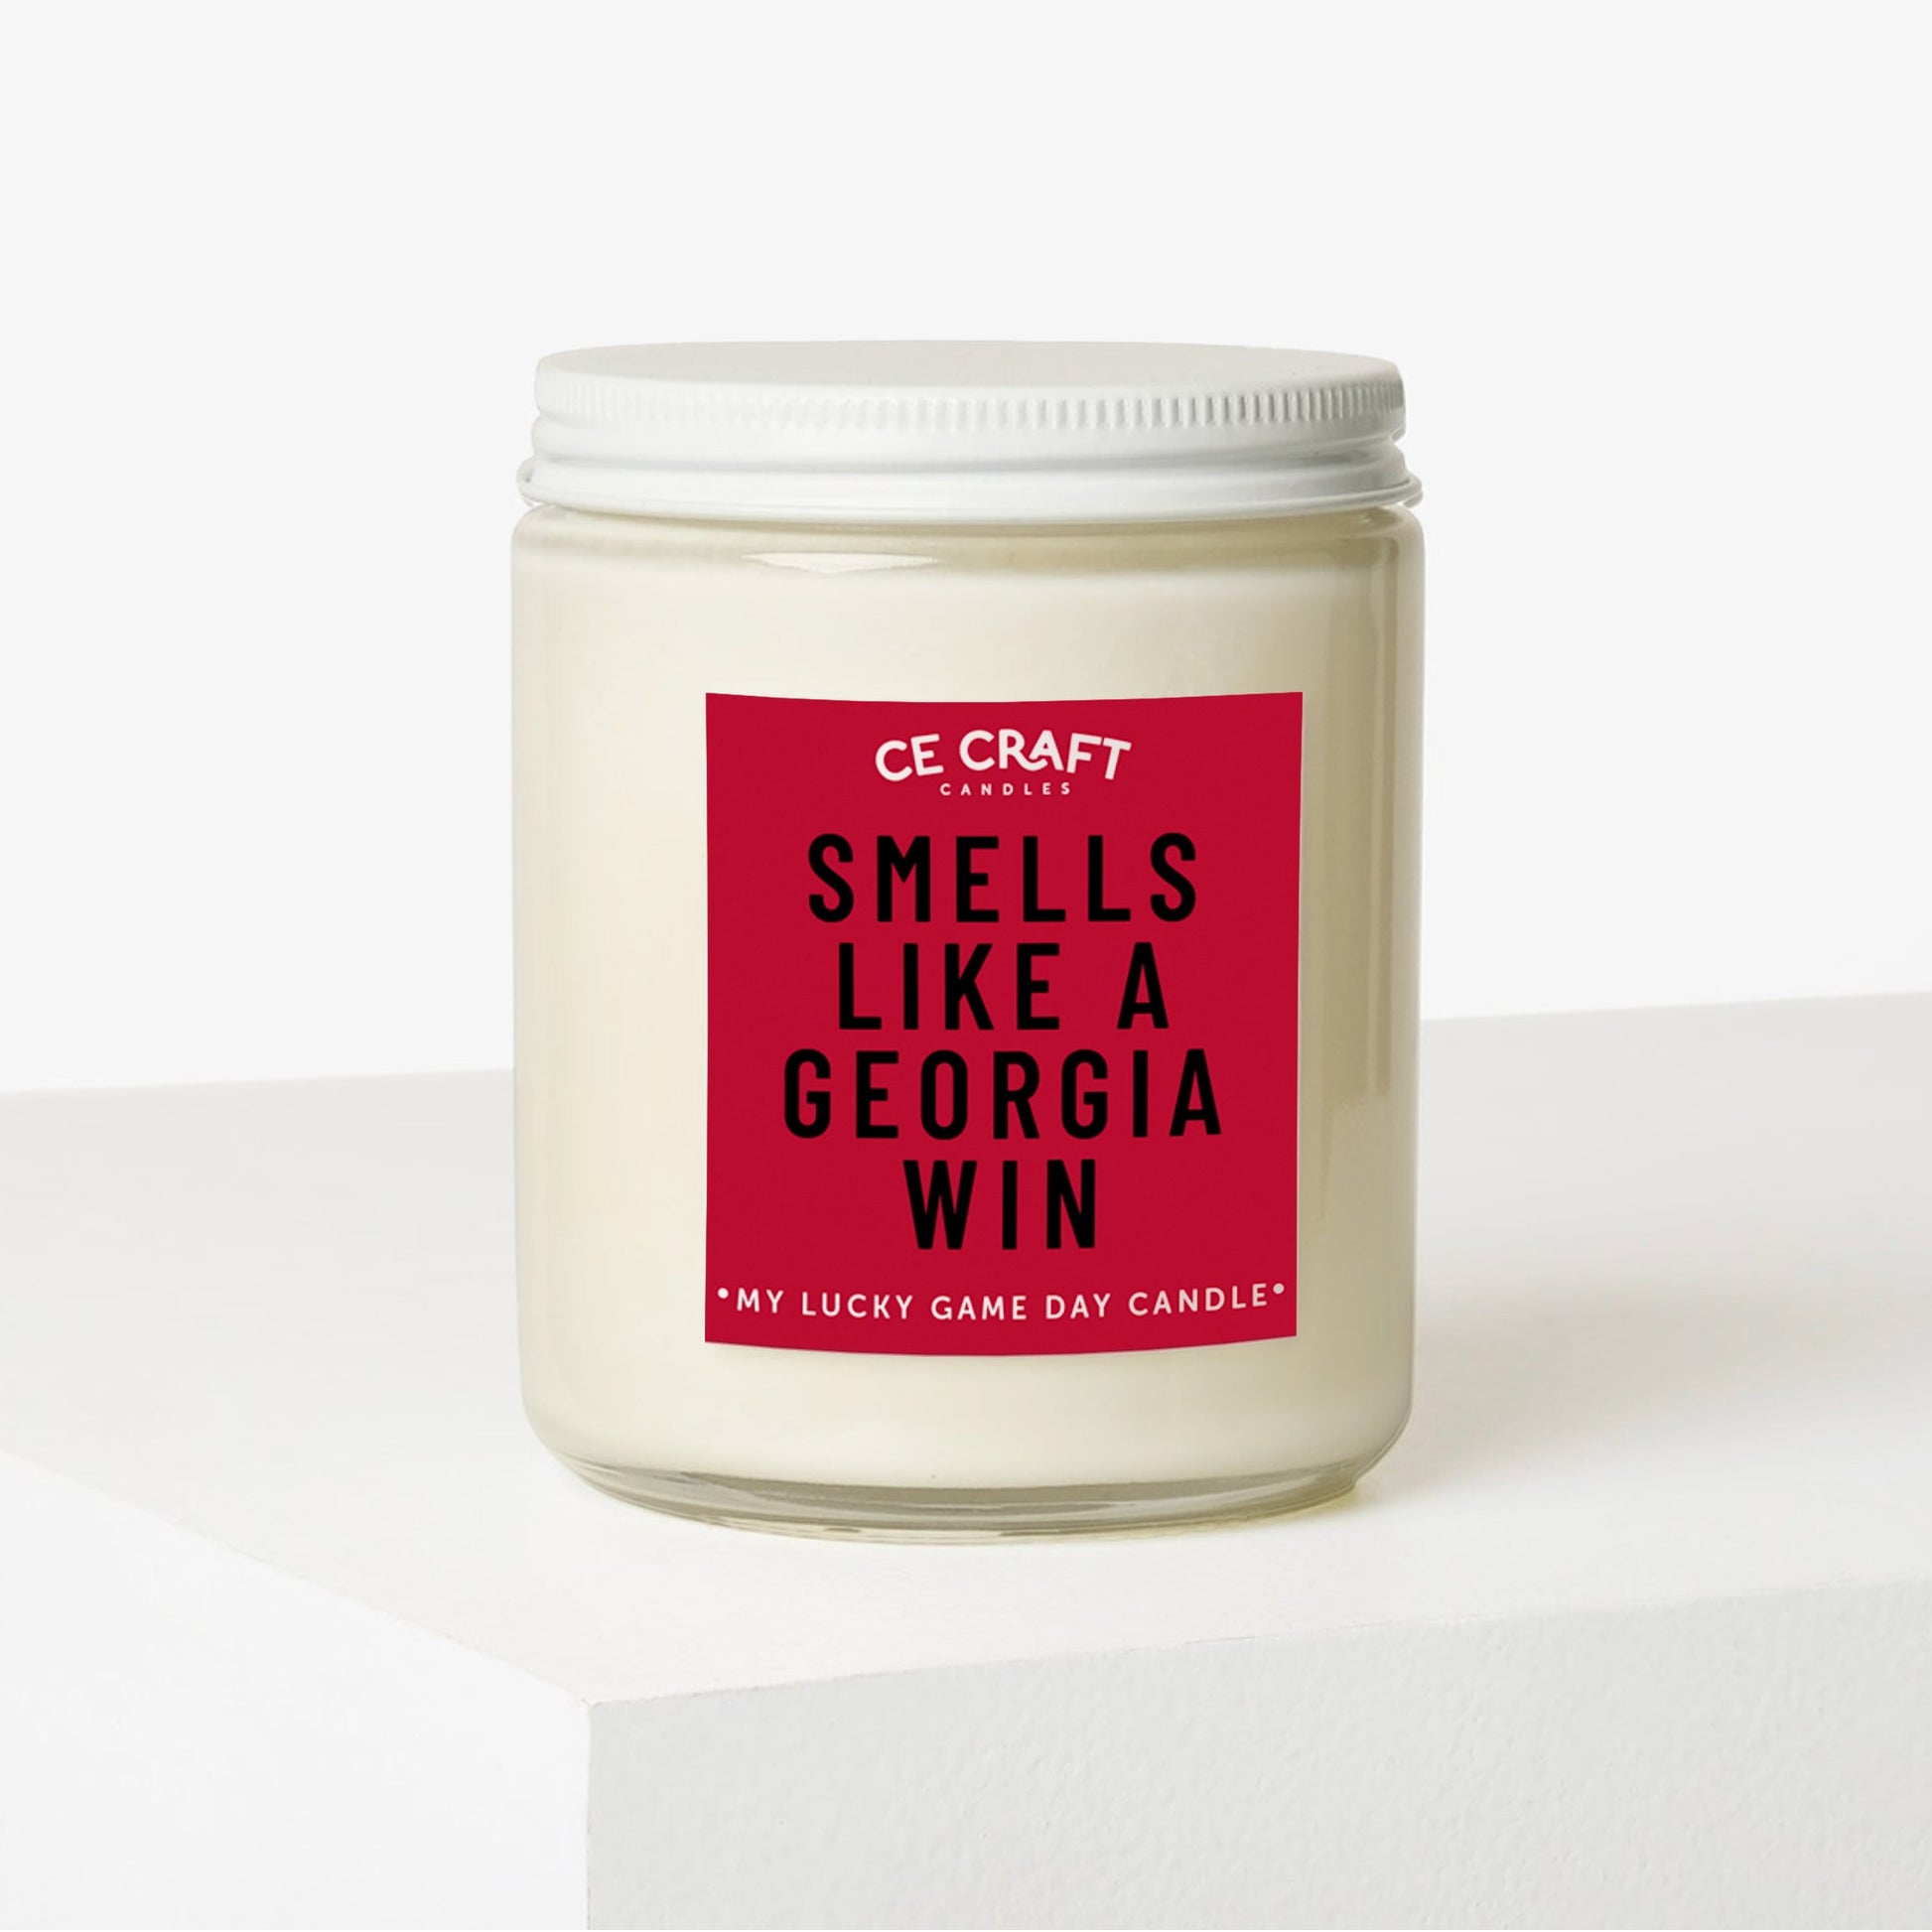 Smells Like A Georgia Win Scented Candle Candles CE Craft 